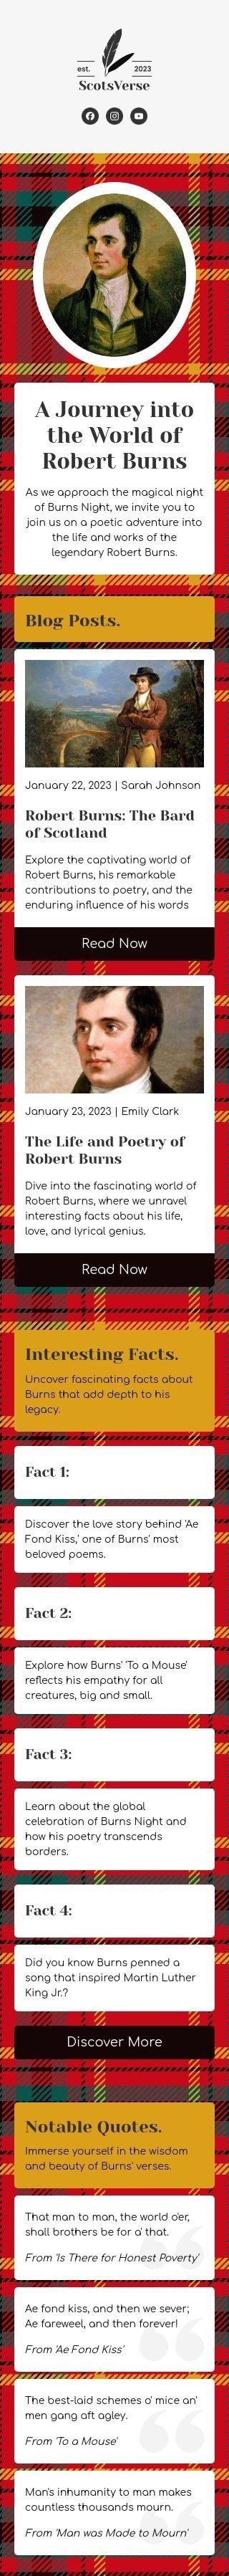 Burns Night email template "World of Robert Burns" for publications & blogging industry mobile view